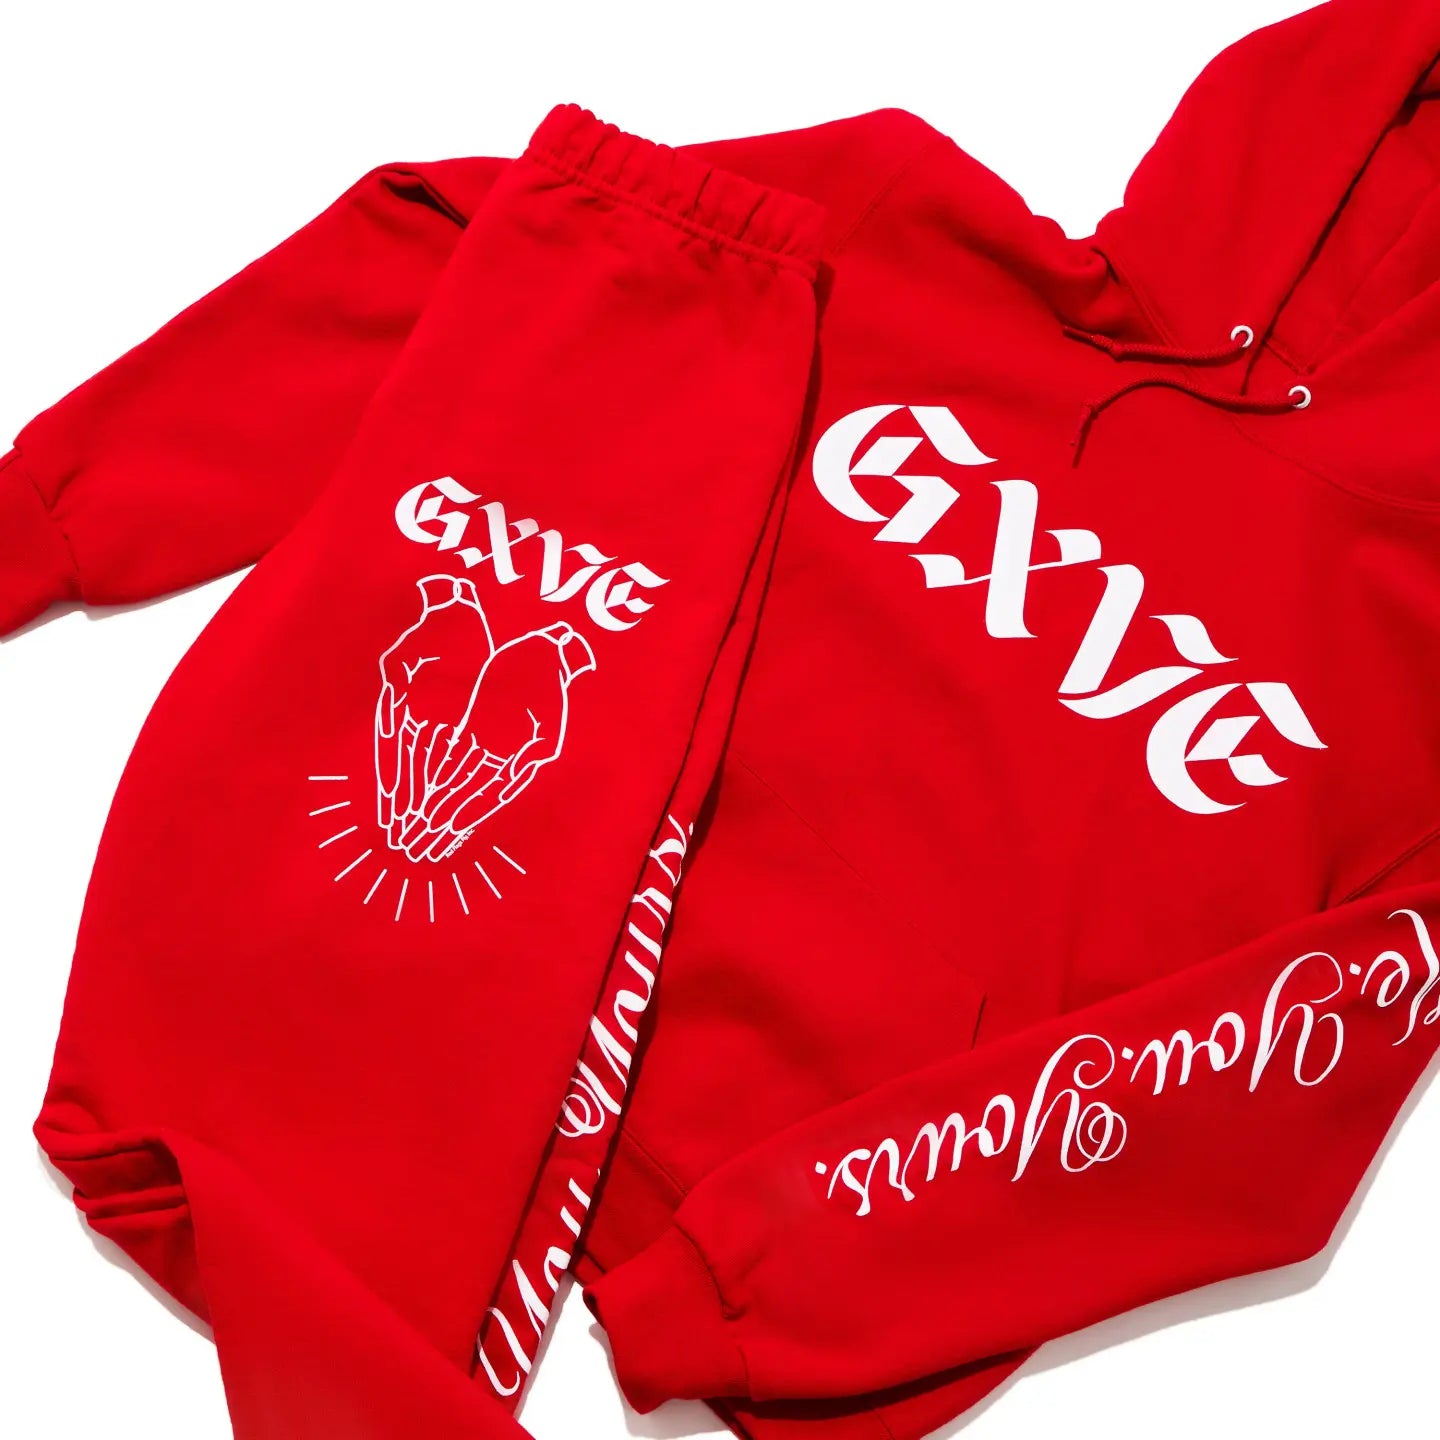 GXVE GXVE RED HOODIE - GXVE custom artwork designed & printed in white on a pullover hoodie in Gwen’s signature GXVE ‘red.’ Made of 50% cotton and 50% polyester.